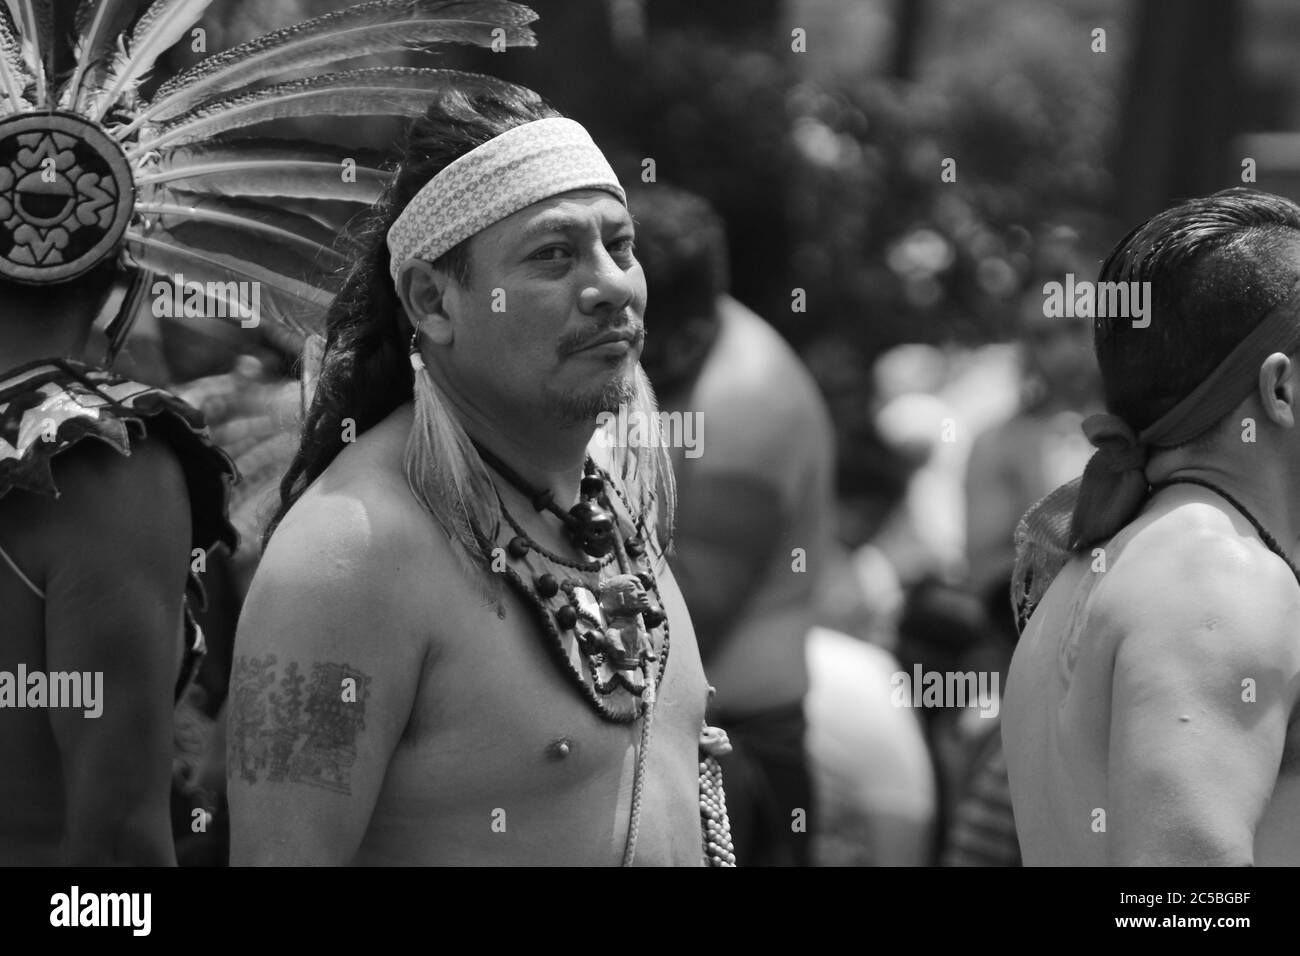 MEXICO CITY, MEXICO - September / 22 / 2018 indigenous man in aztec clothing Stock Photo